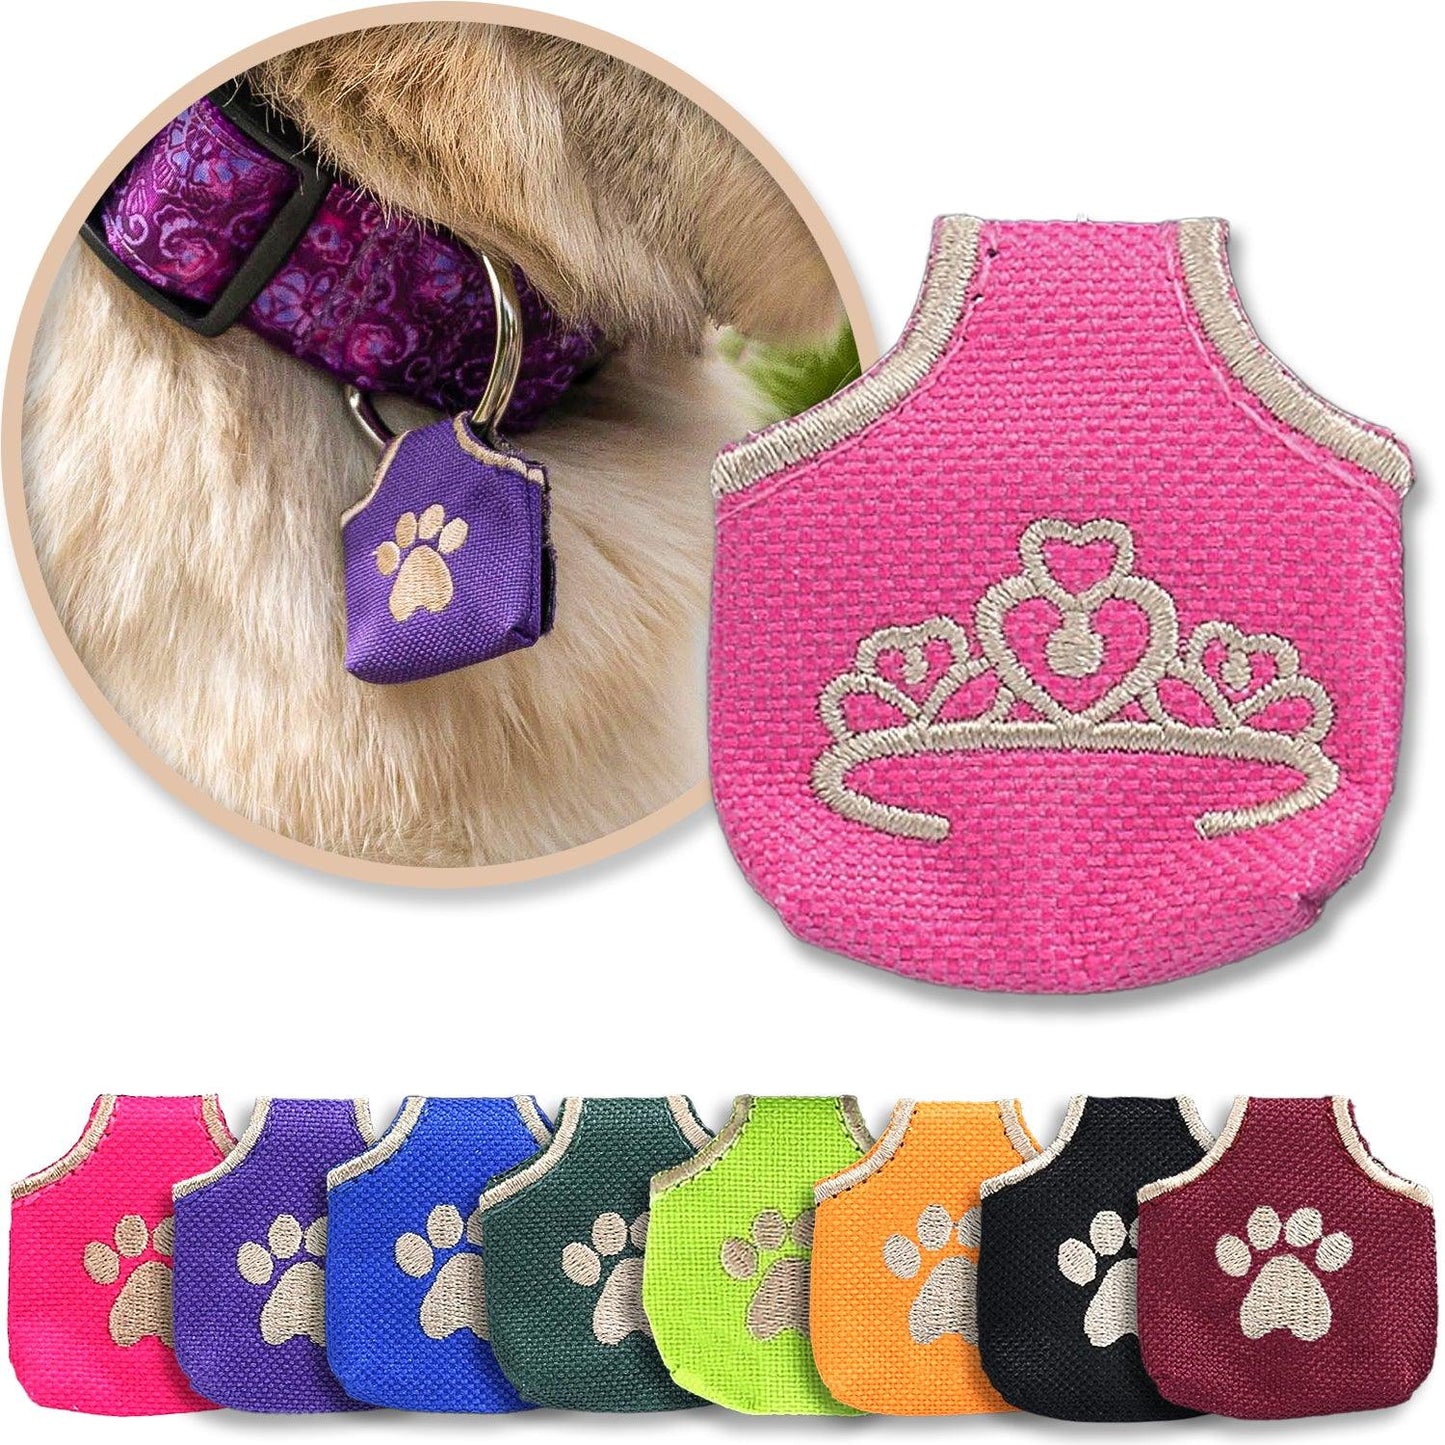 Pink 'princess' dog tag cover shown with other colors